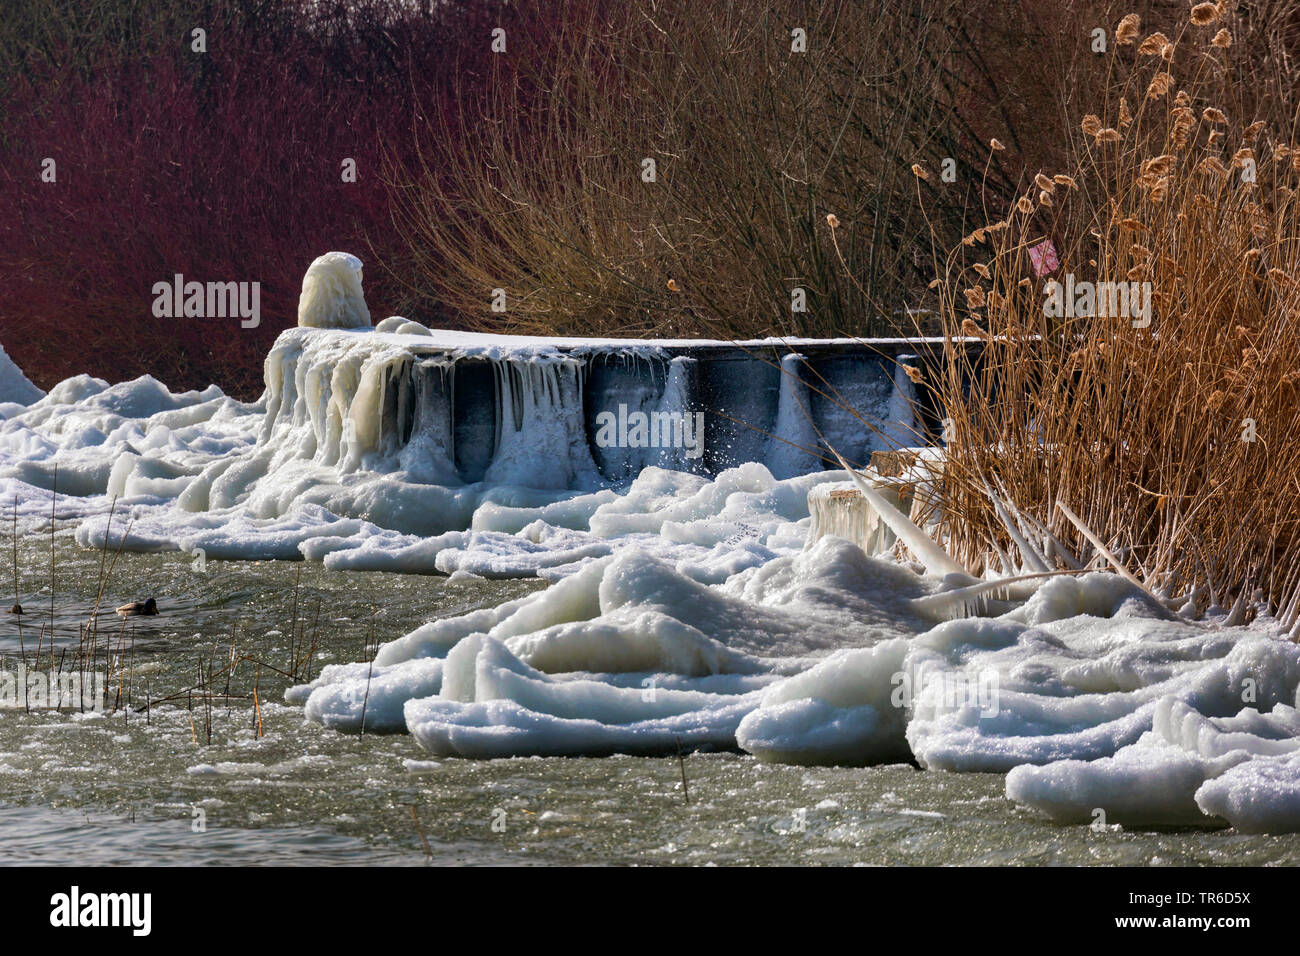 ice waves and ice sculptures on the shore after winter storm, Germany, Bavaria, Lake Chiemsee Stock Photo